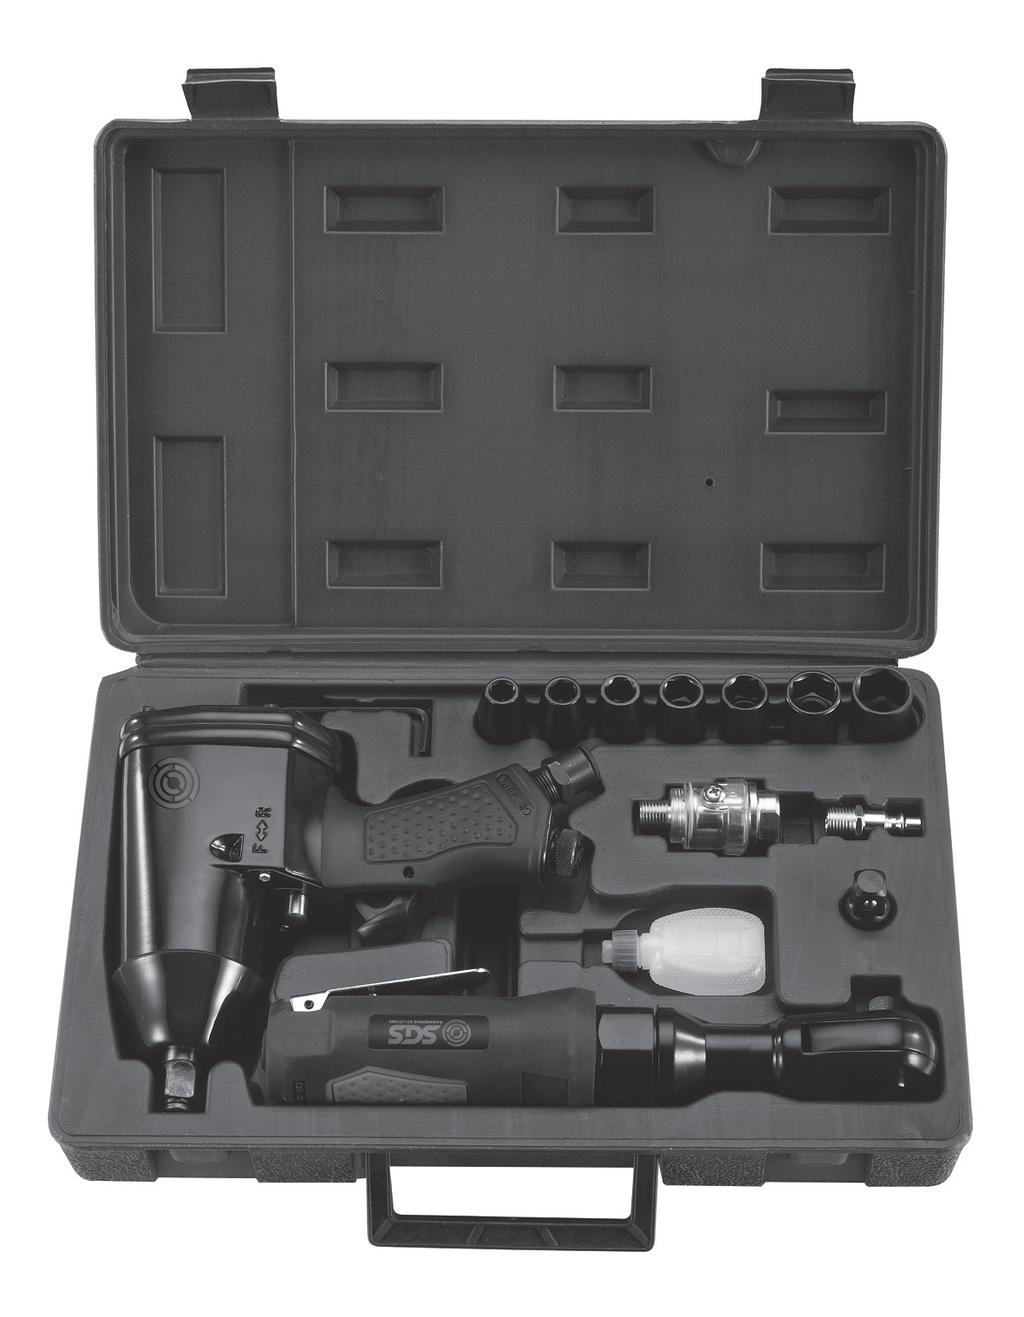 SAT110K IMPACT & RATCHET WRENCH KIT OWNER S MANUAL FOR YOUR SAFETY